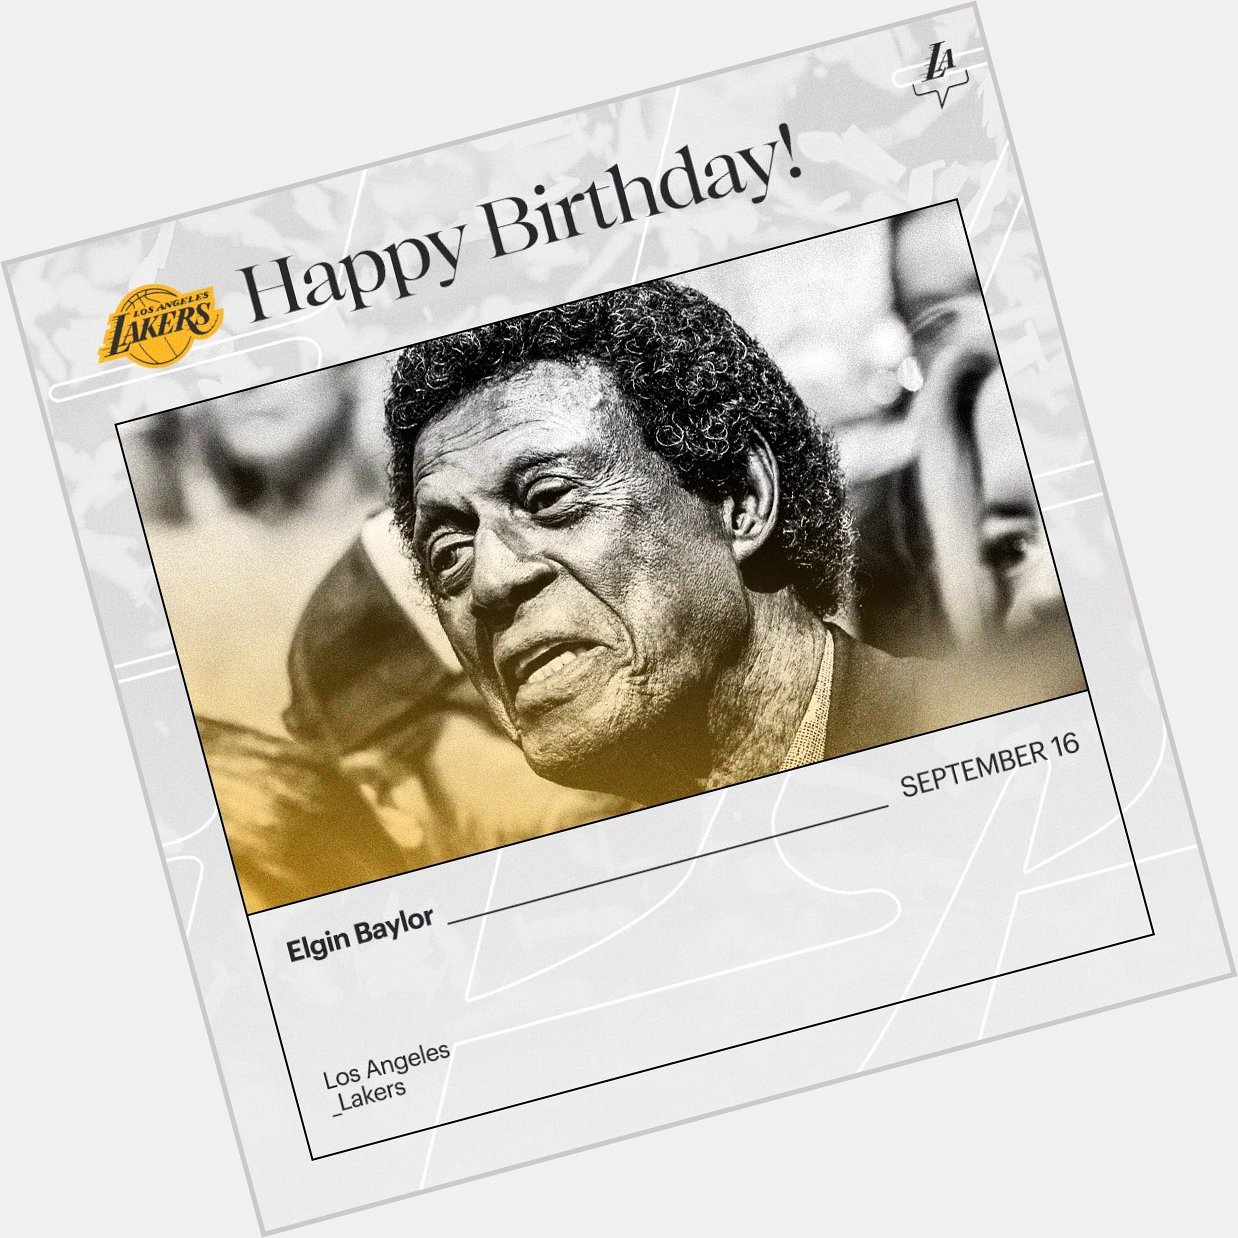 Happy birthday to legend Elgin Baylor your legacy will live forever  